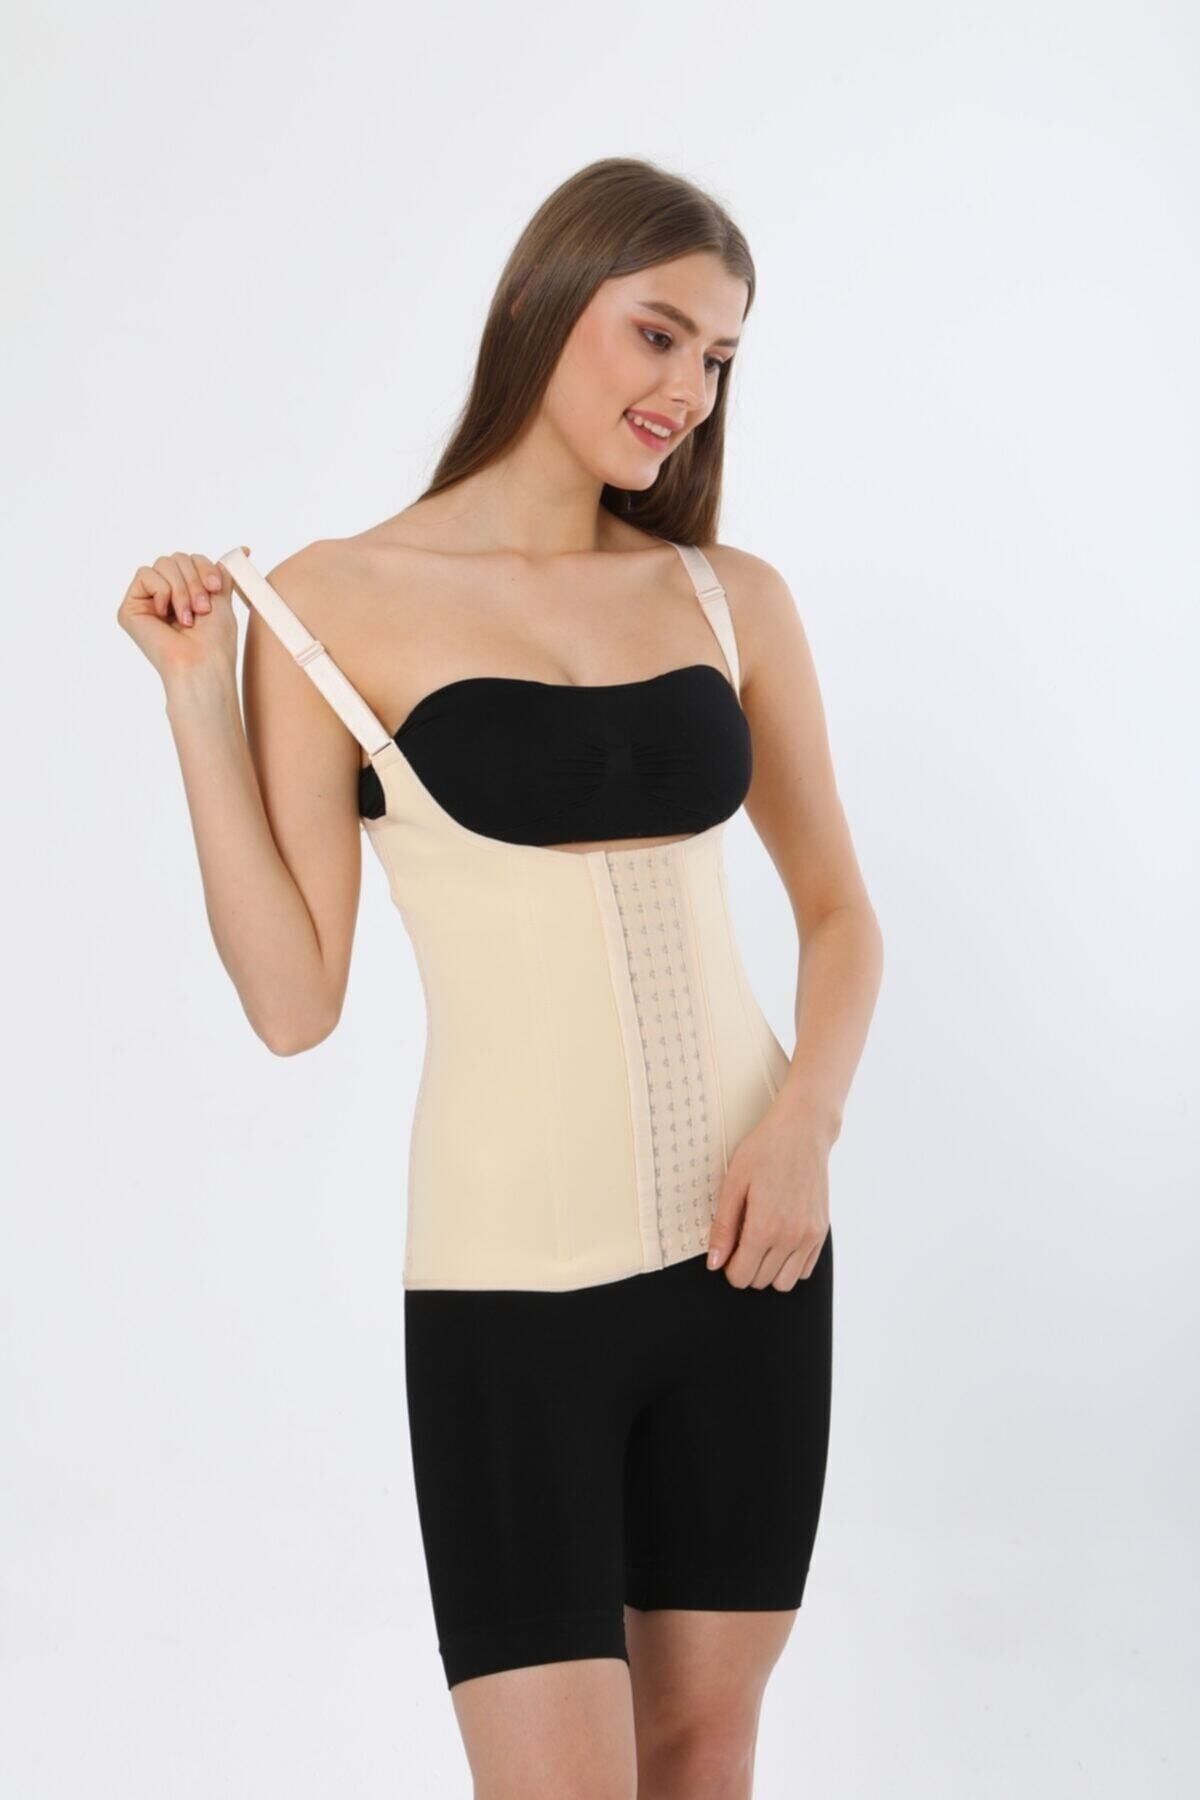 CAWAR Strappy Latex Corset After Pregnancy - Trendyol